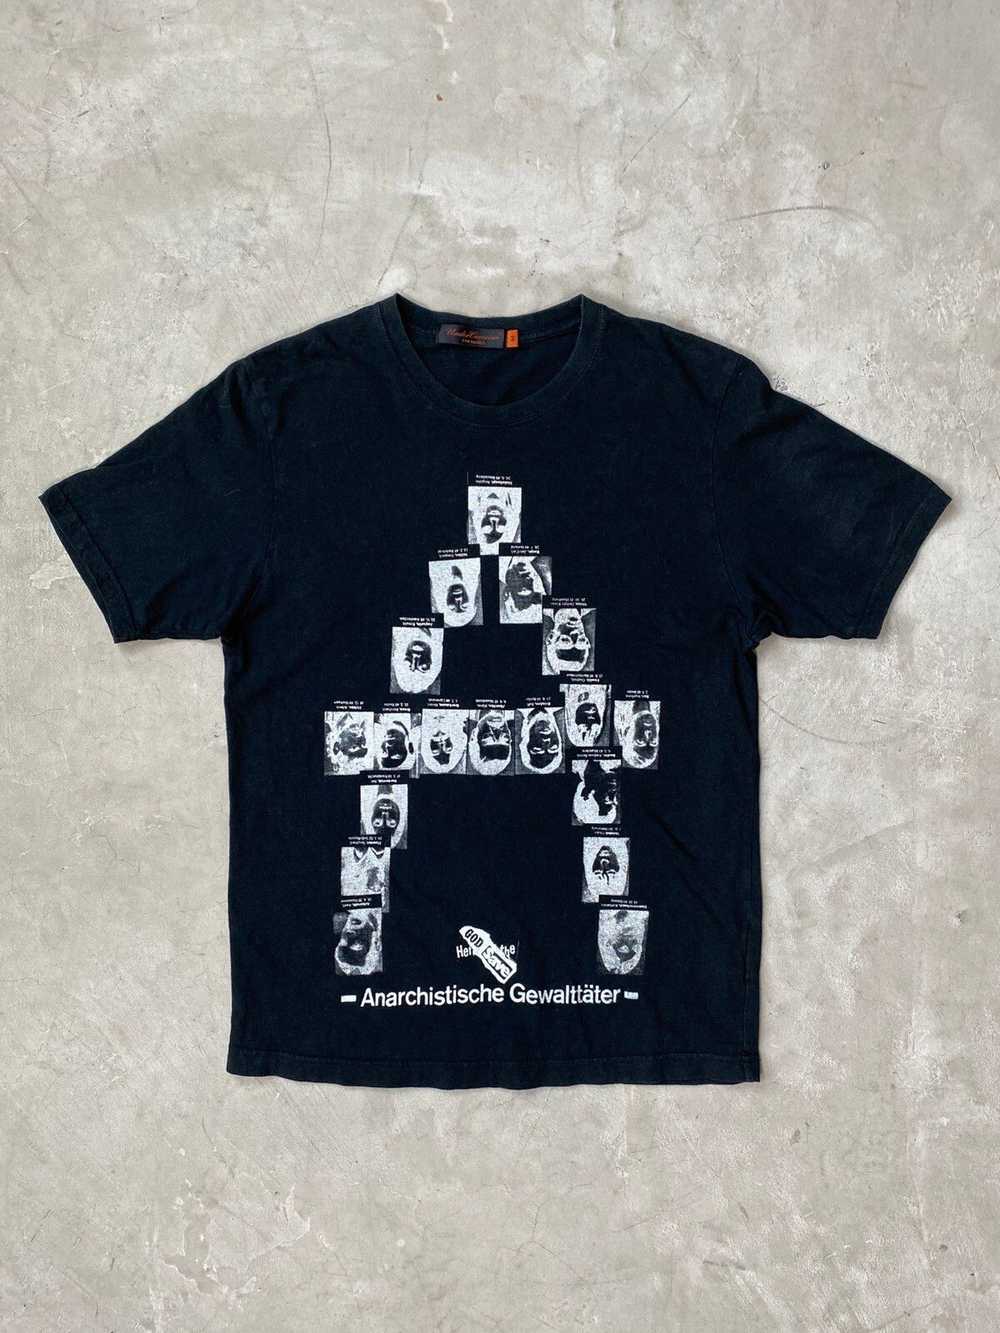 Undercover Undercover Anarchy “A” Tee - image 1